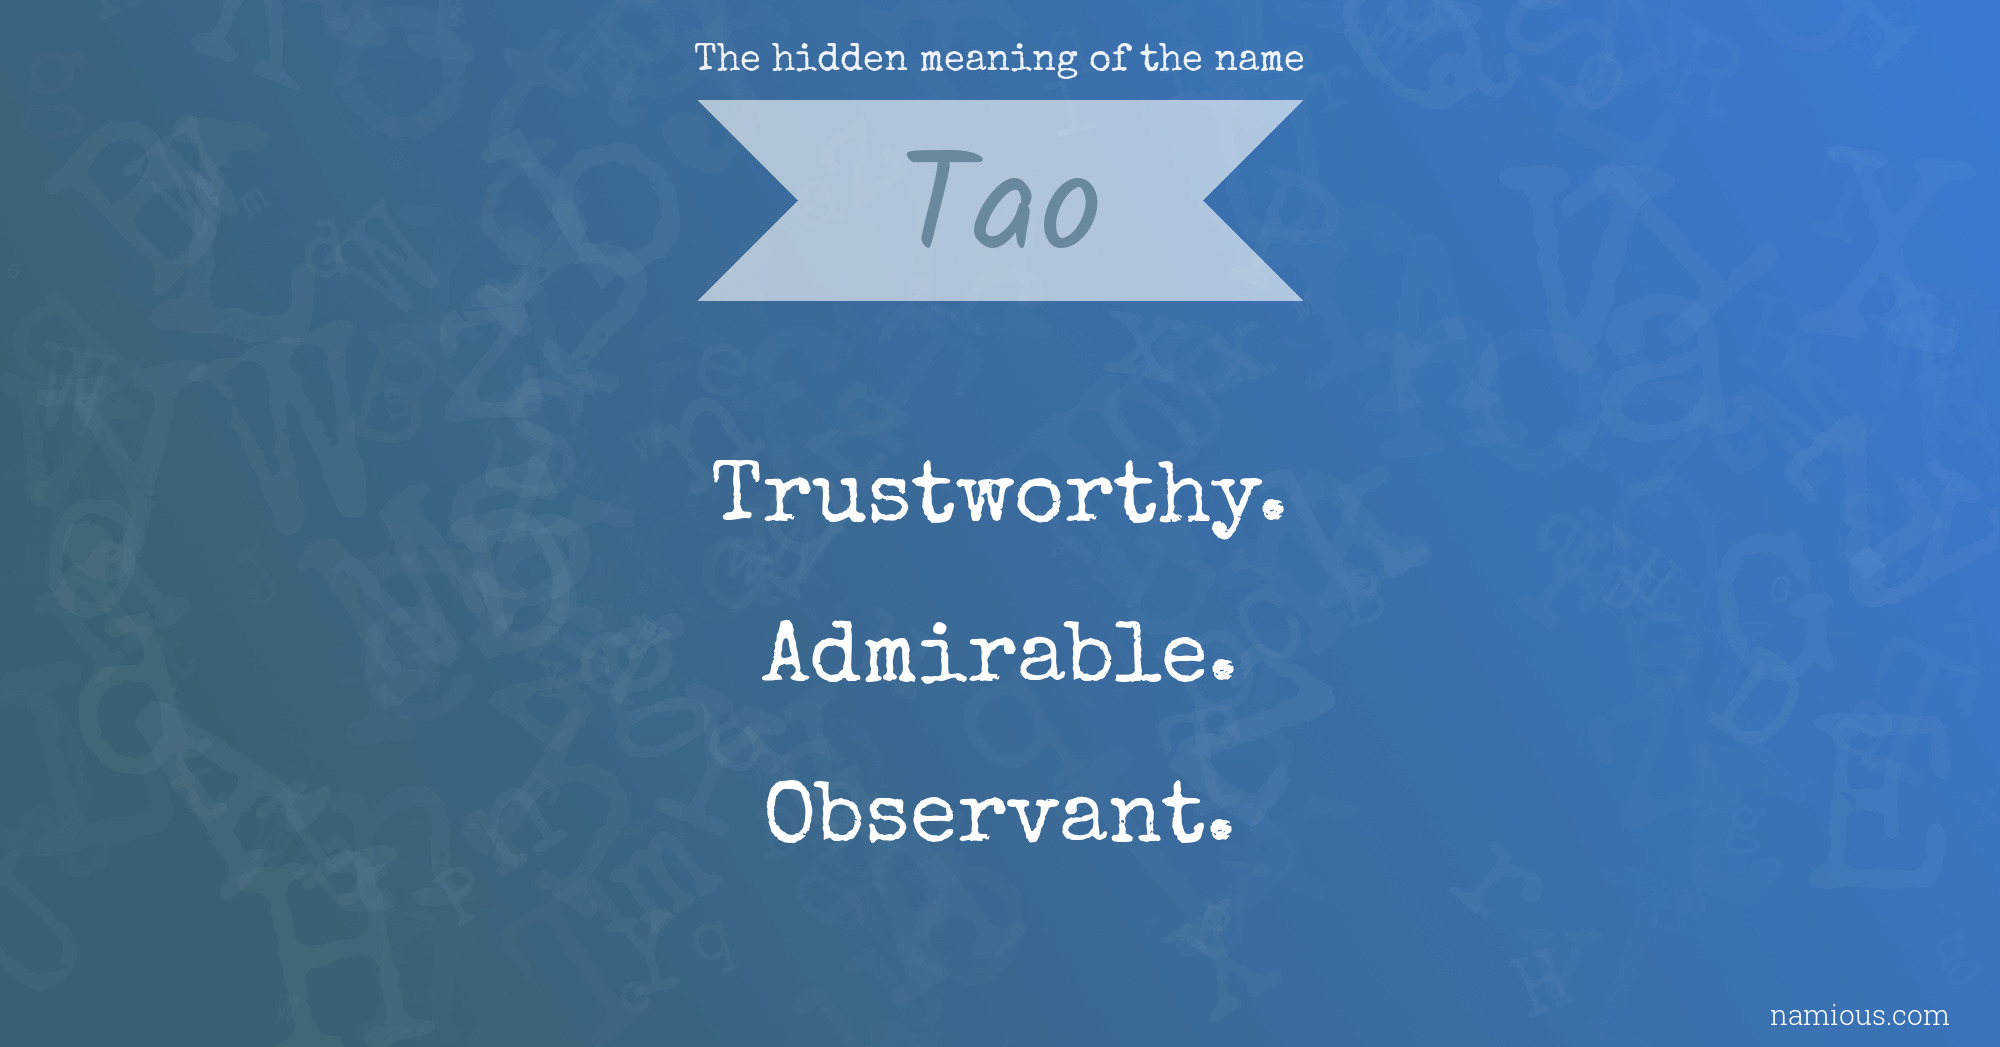 The hidden meaning of the name Tao